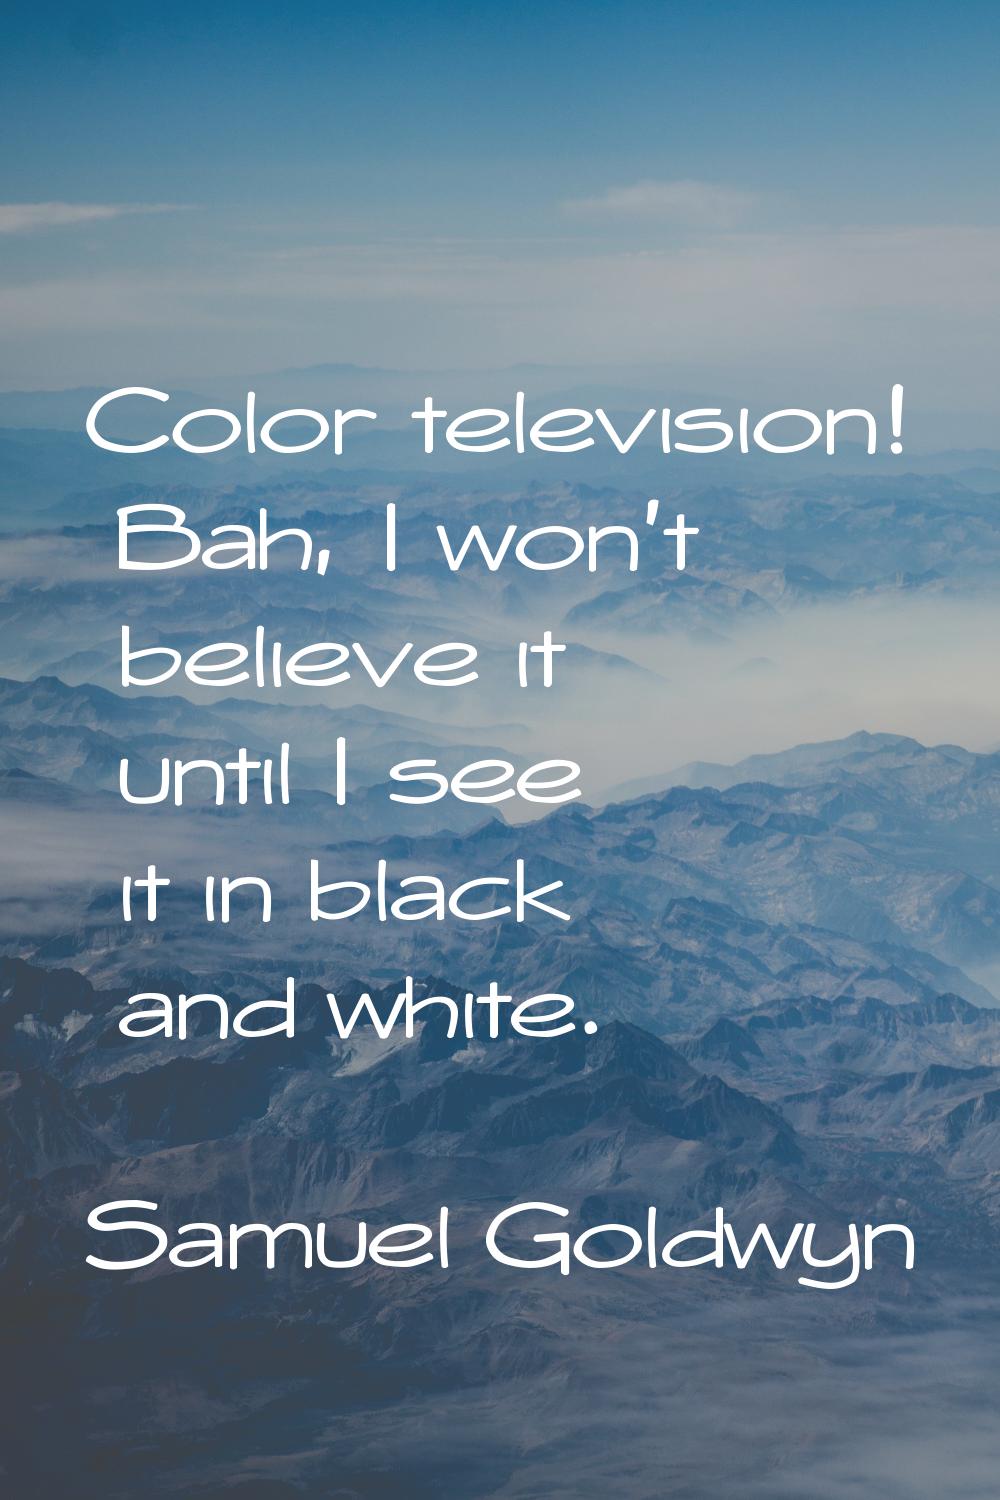 Color television! Bah, I won't believe it until I see it in black and white.